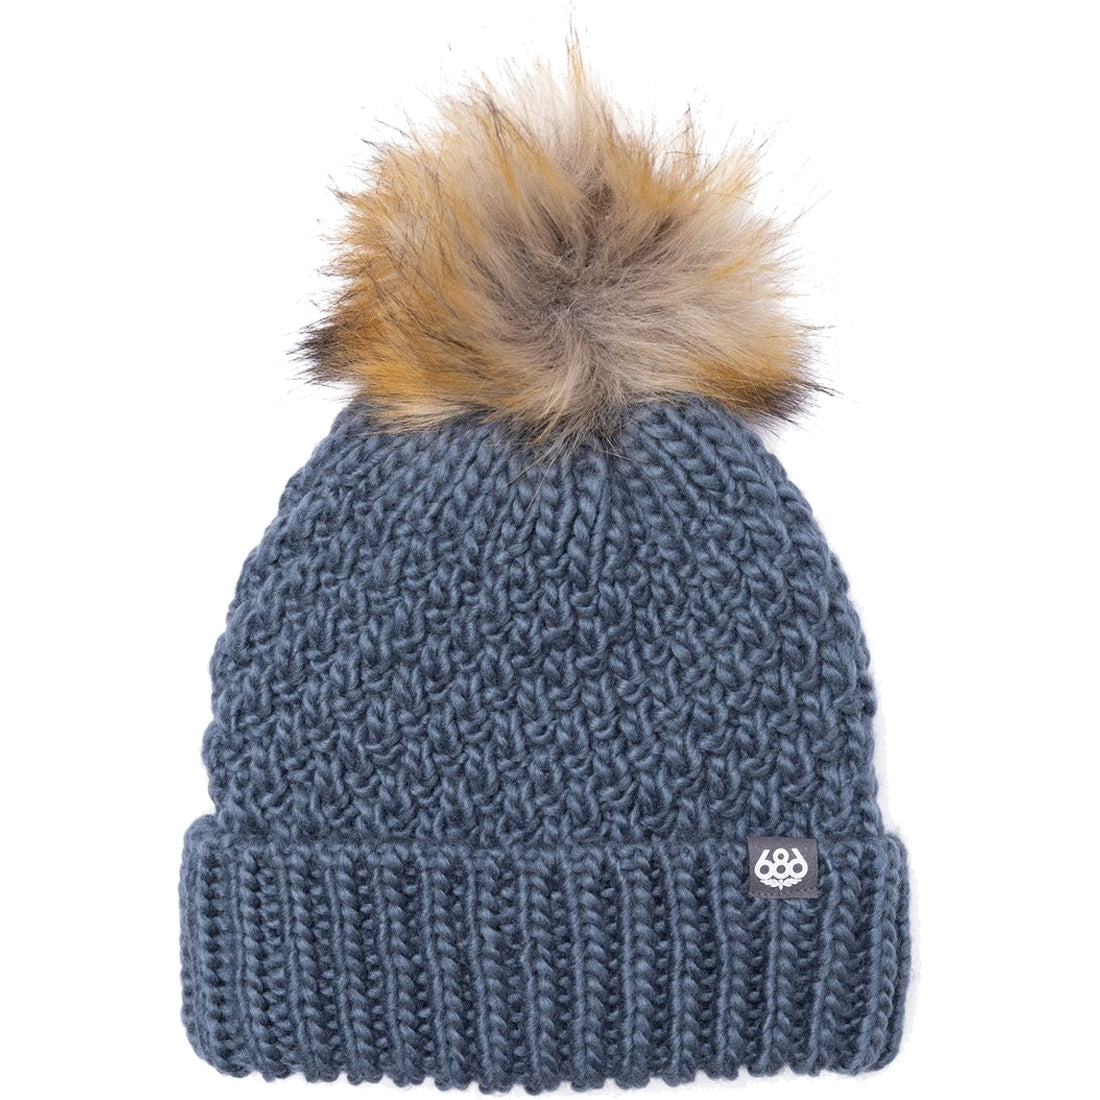 686 Majesty Cable Knit Beanie - Women's